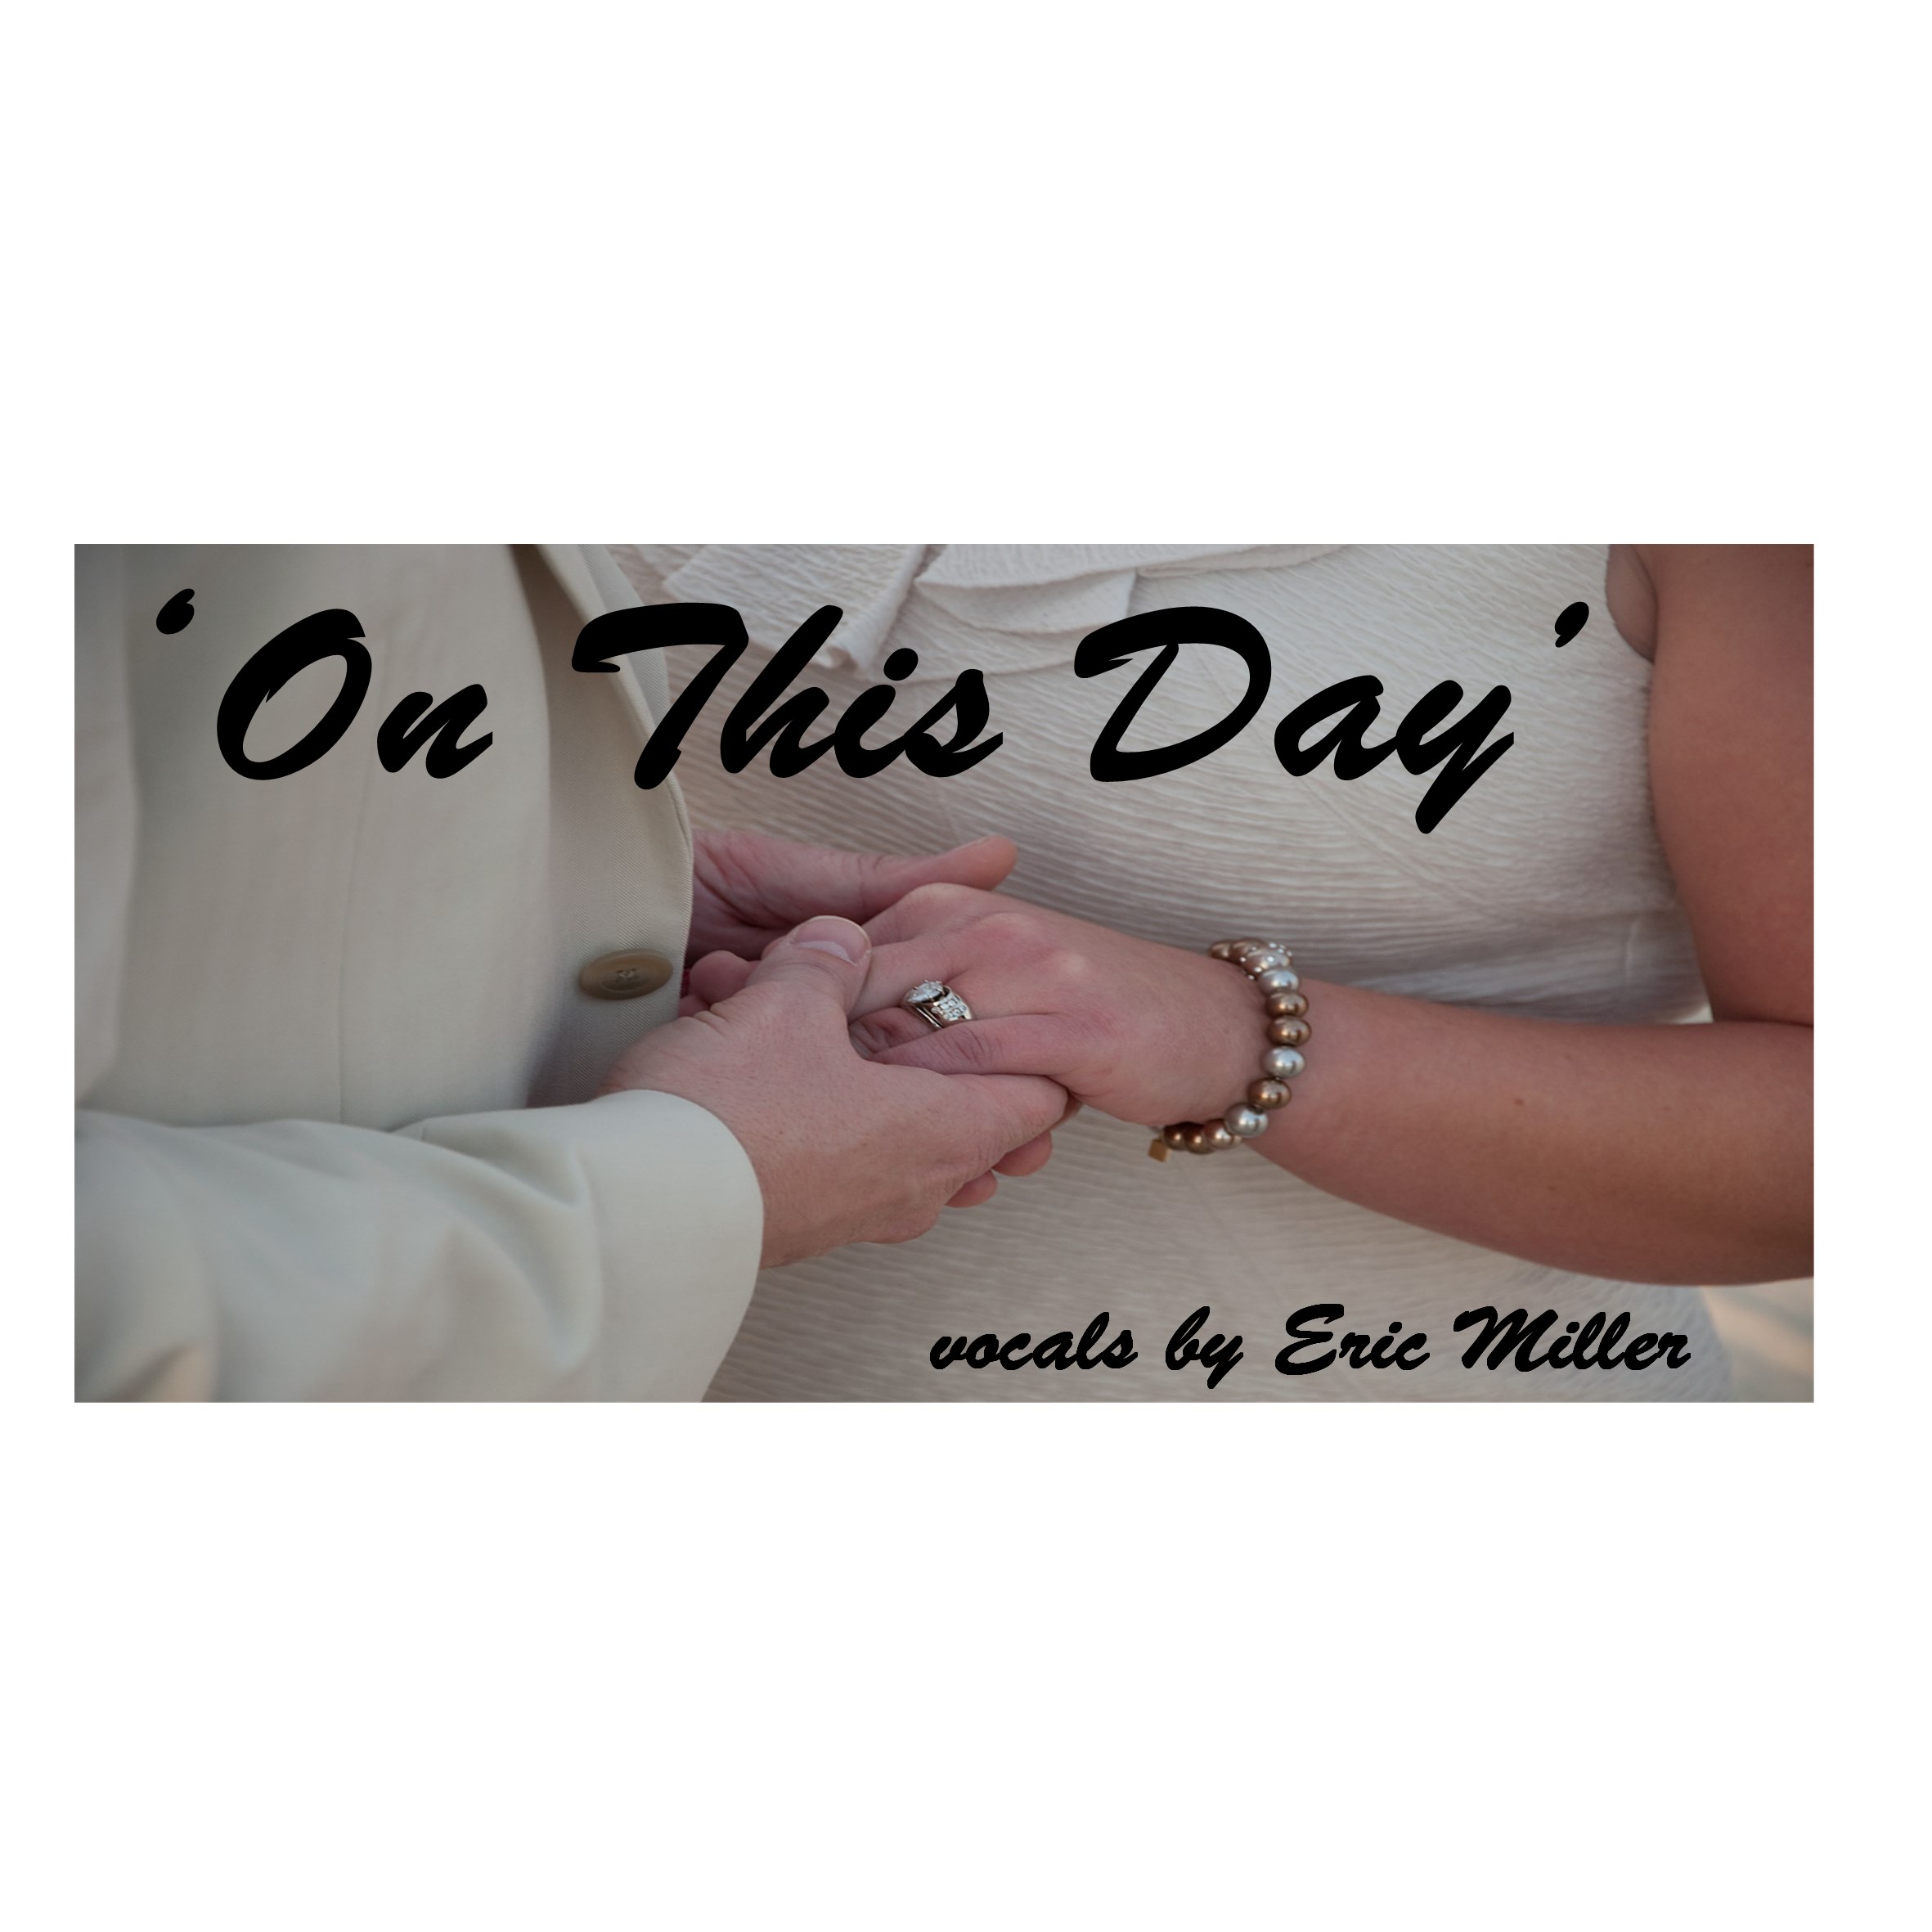 Eric Miller sings 'ON THIS DAY' classical / crossover / wedding /anniversary song